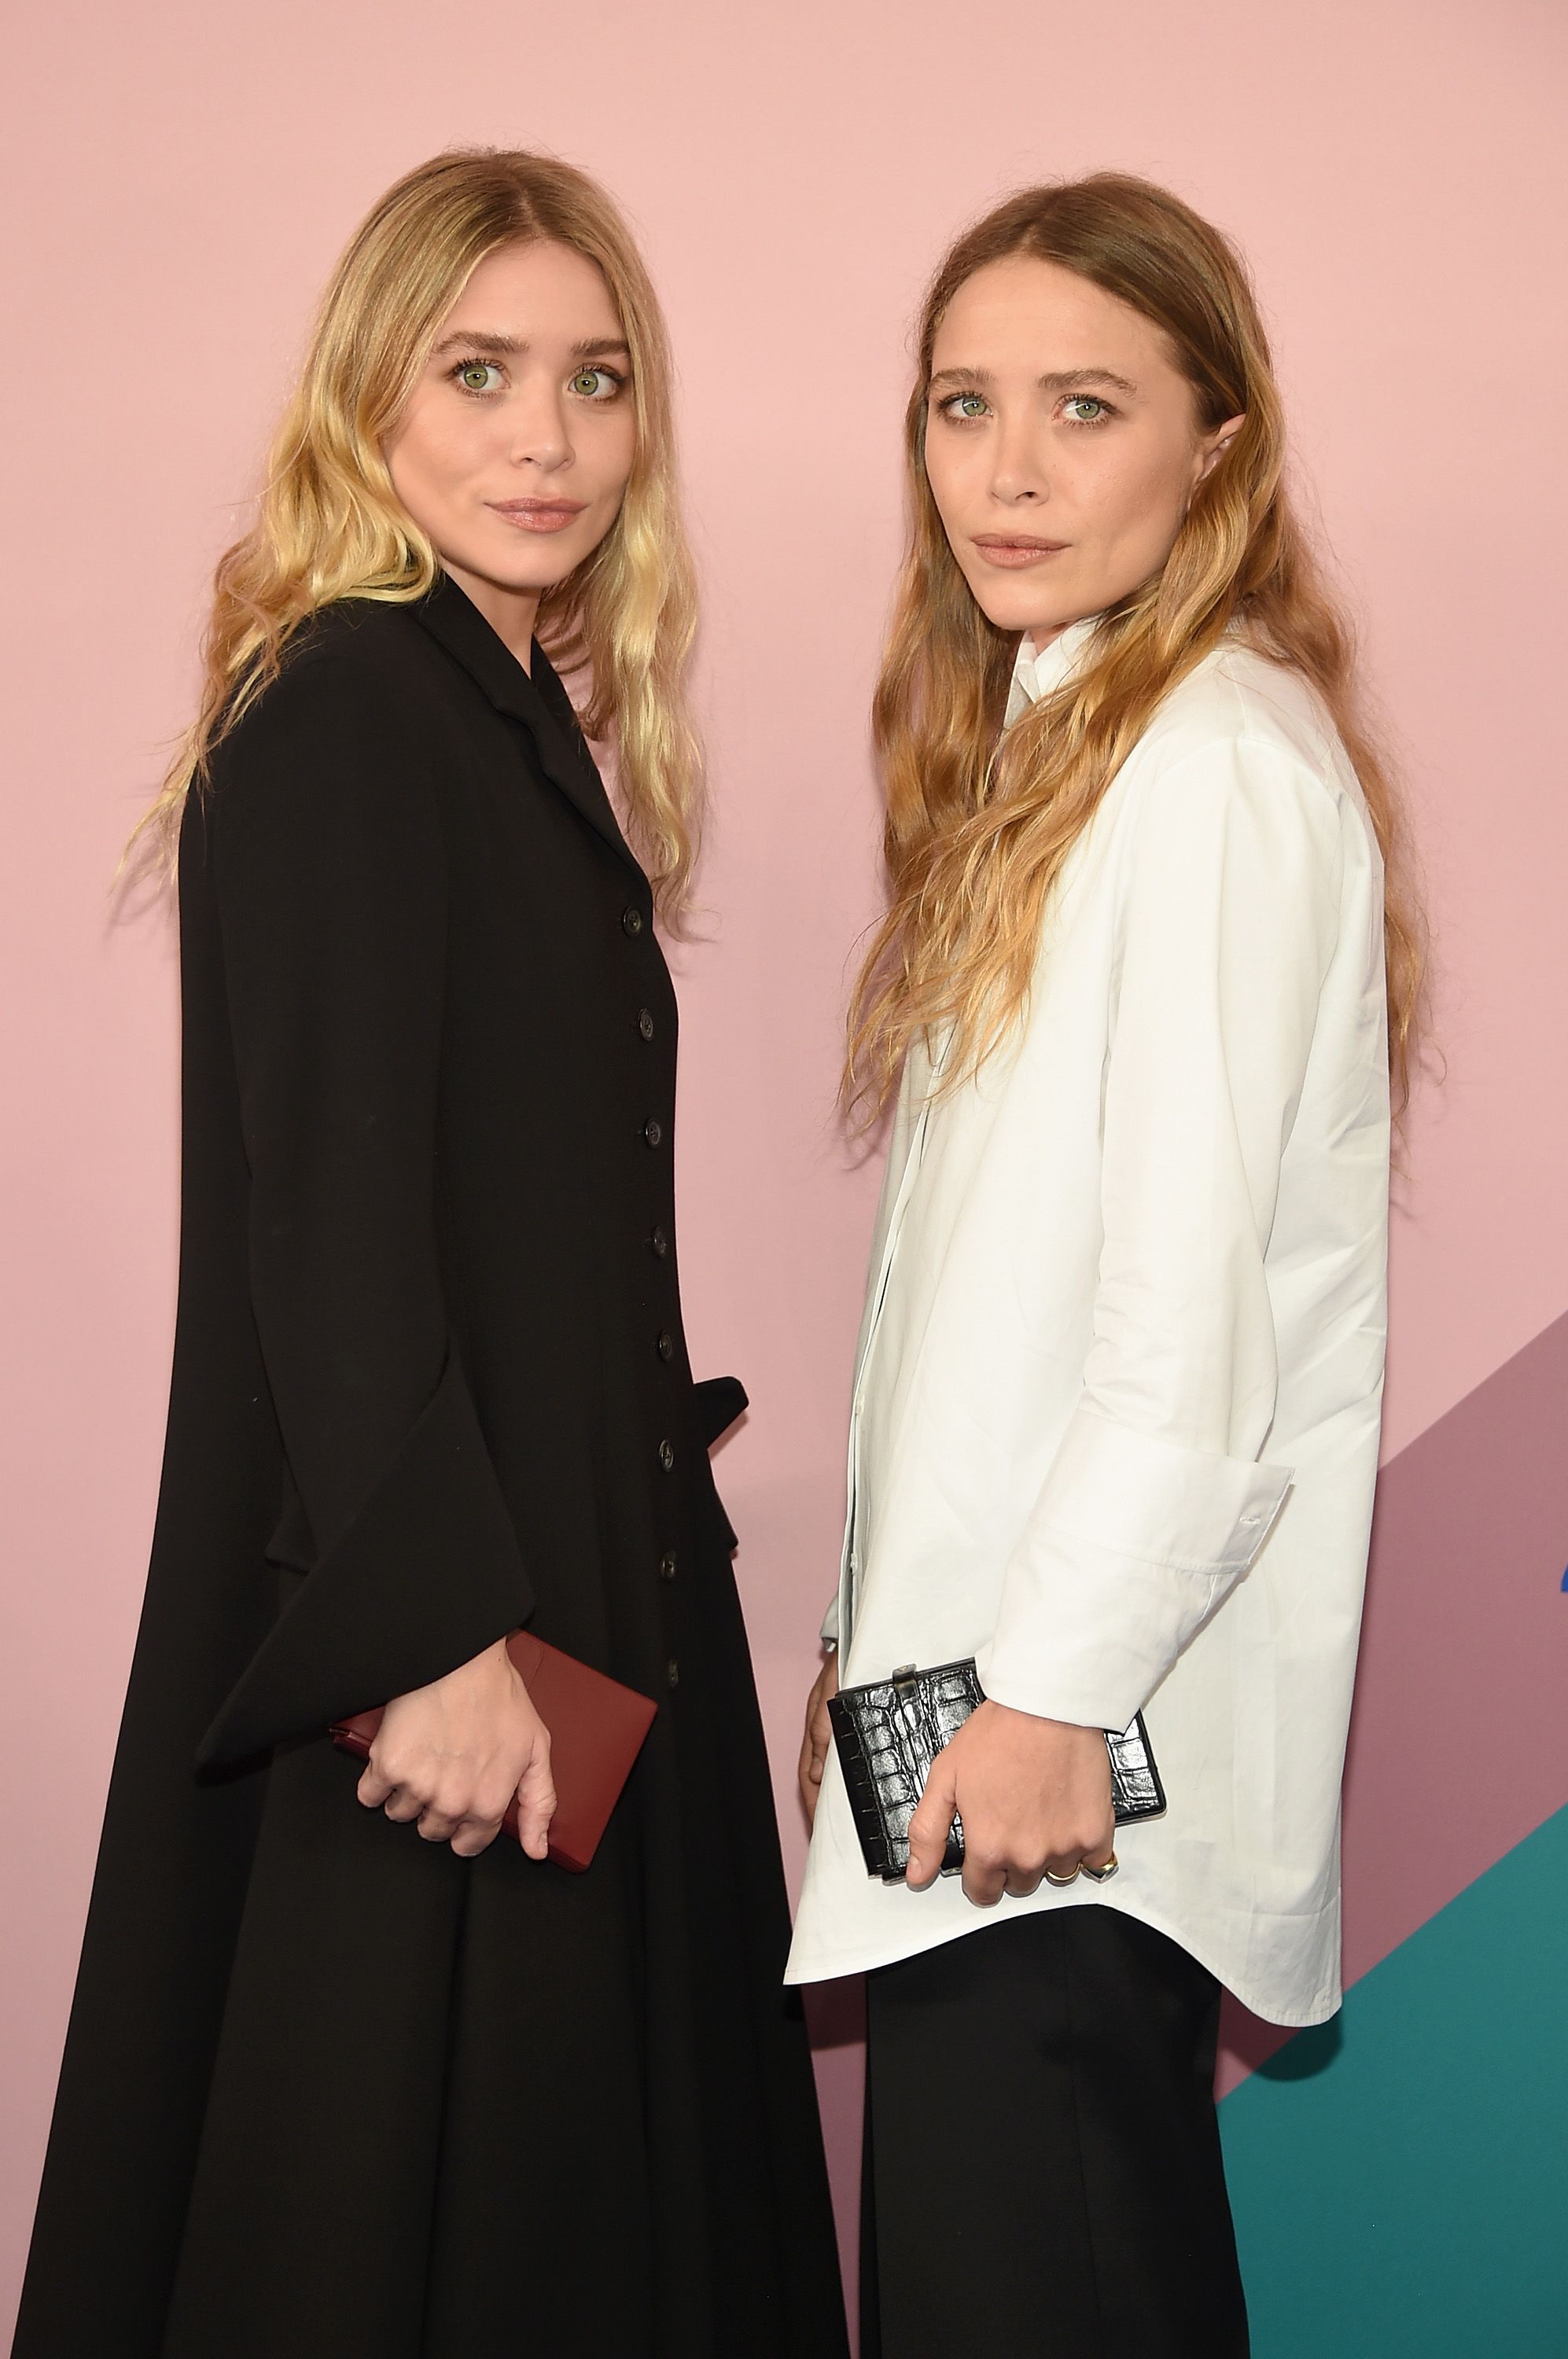 The Olsen's Twins Clothing Label Elizabeth and James is Coming to